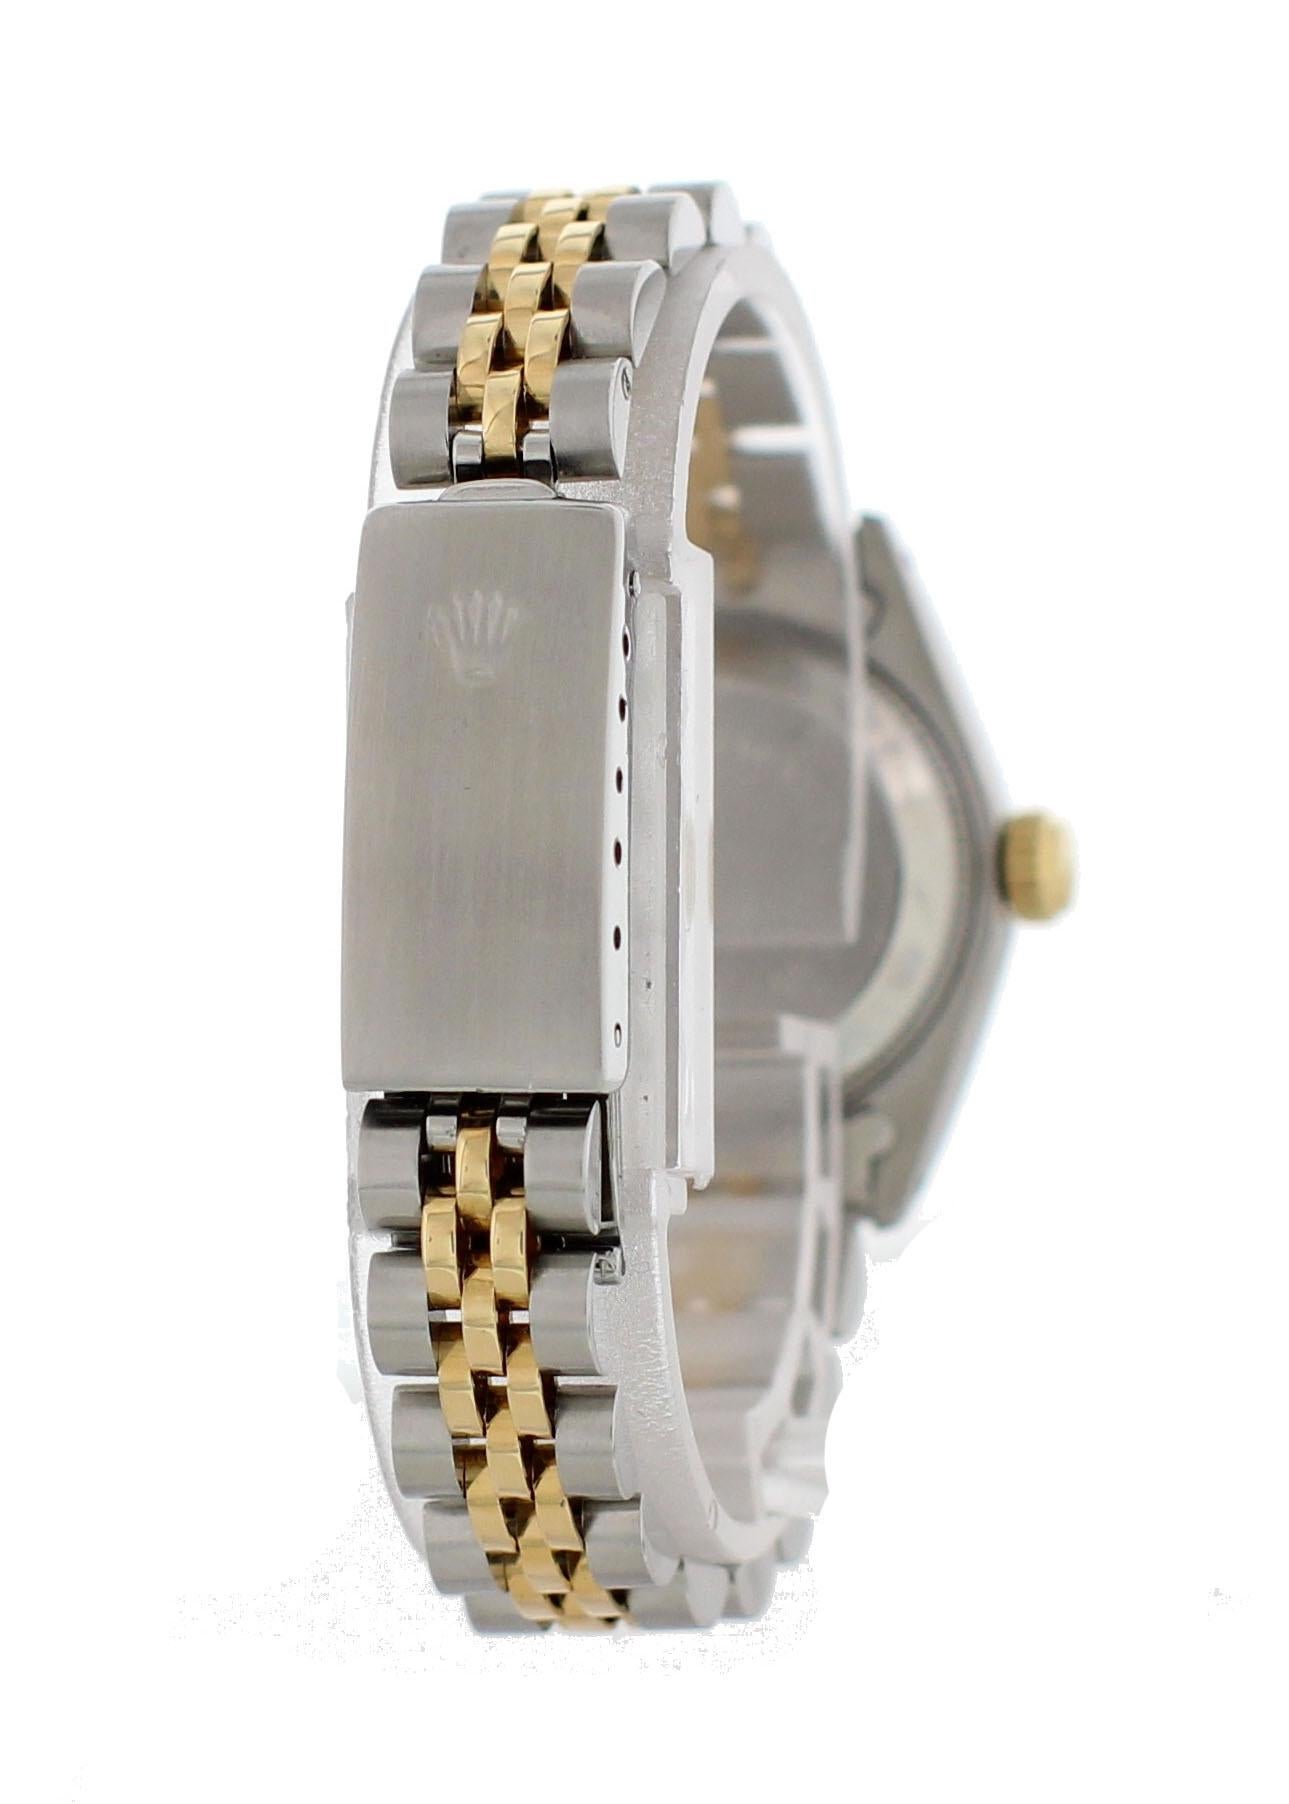 Rolex Oyster Perpetual Datejust 69173 Ladies Watch In Excellent Condition For Sale In New York, NY